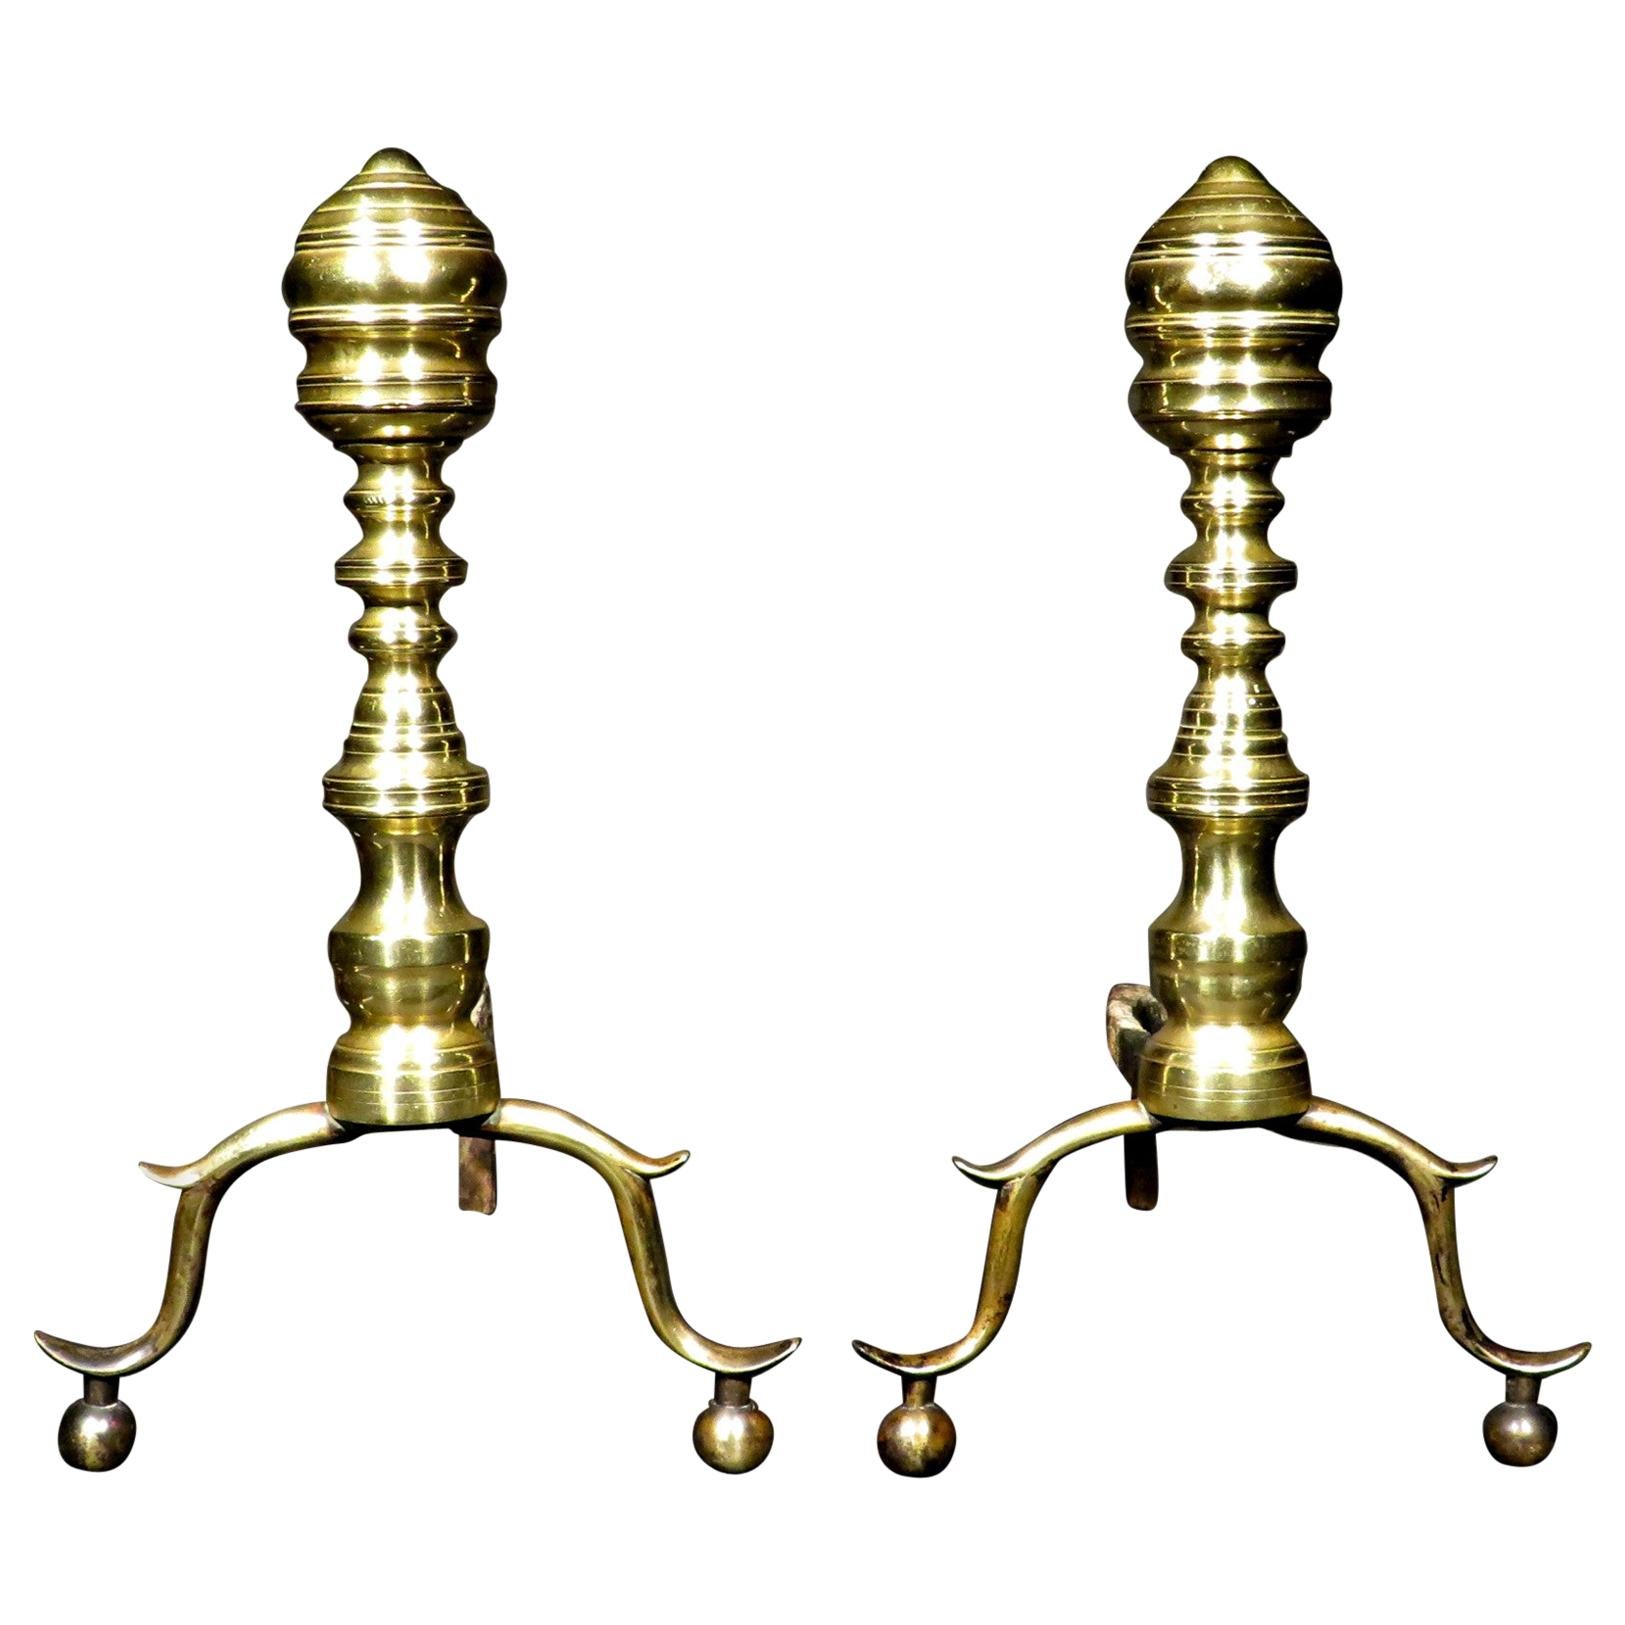 Pair of Early 19th Century Beehive Brass Andirons, New England Circa 1800